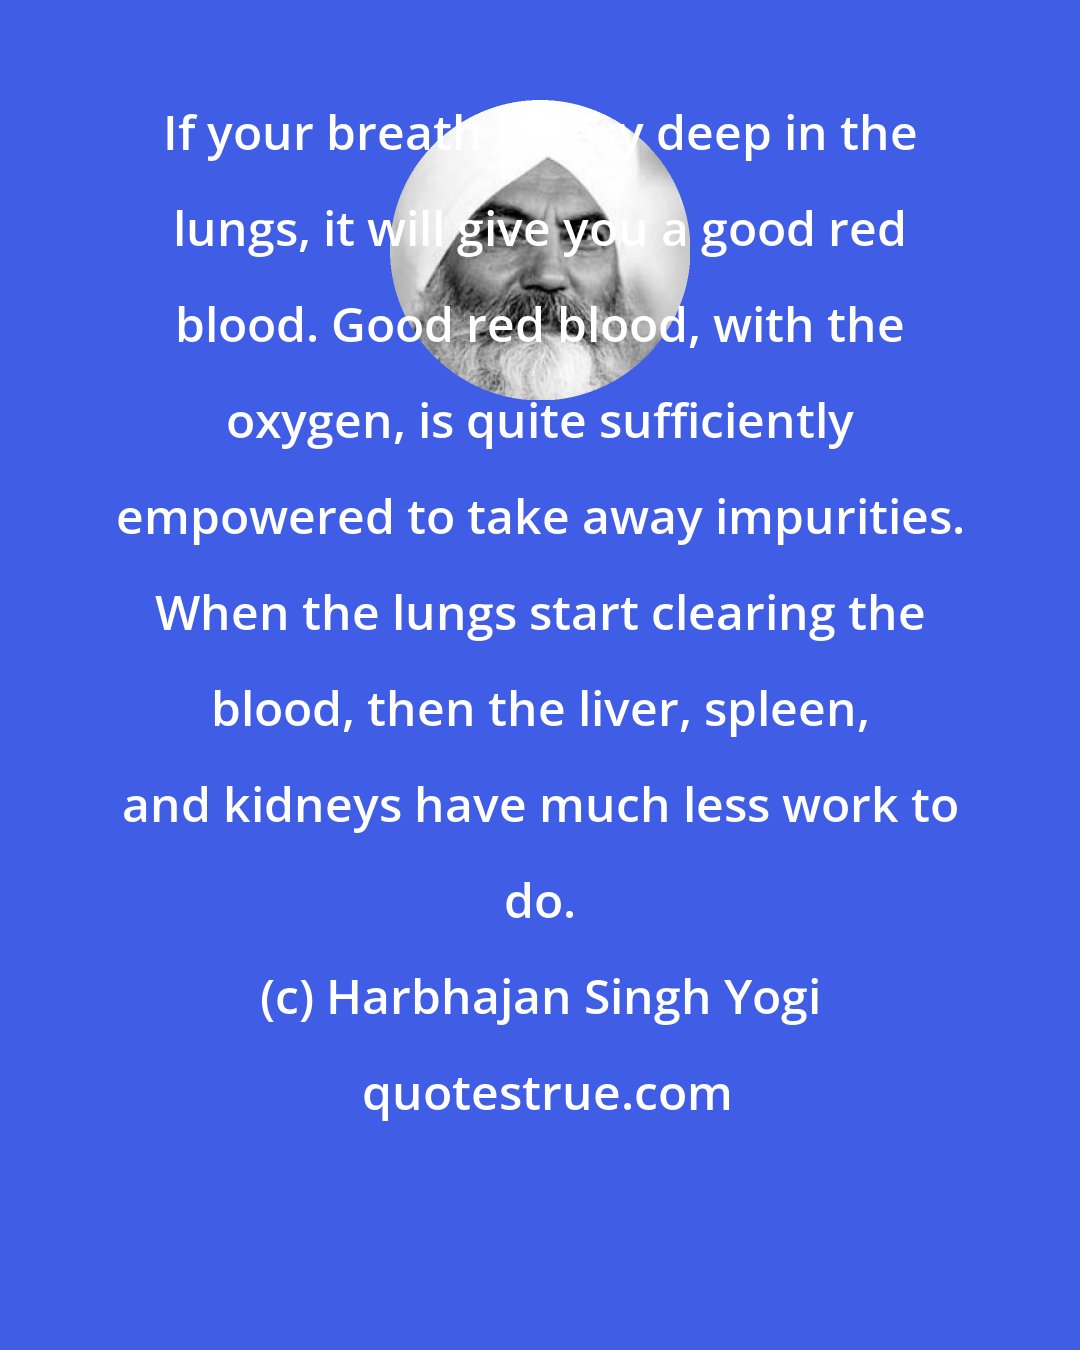 Harbhajan Singh Yogi: If your breath is very deep in the lungs, it will give you a good red blood. Good red blood, with the oxygen, is quite sufficiently empowered to take away impurities. When the lungs start clearing the blood, then the liver, spleen, and kidneys have much less work to do.